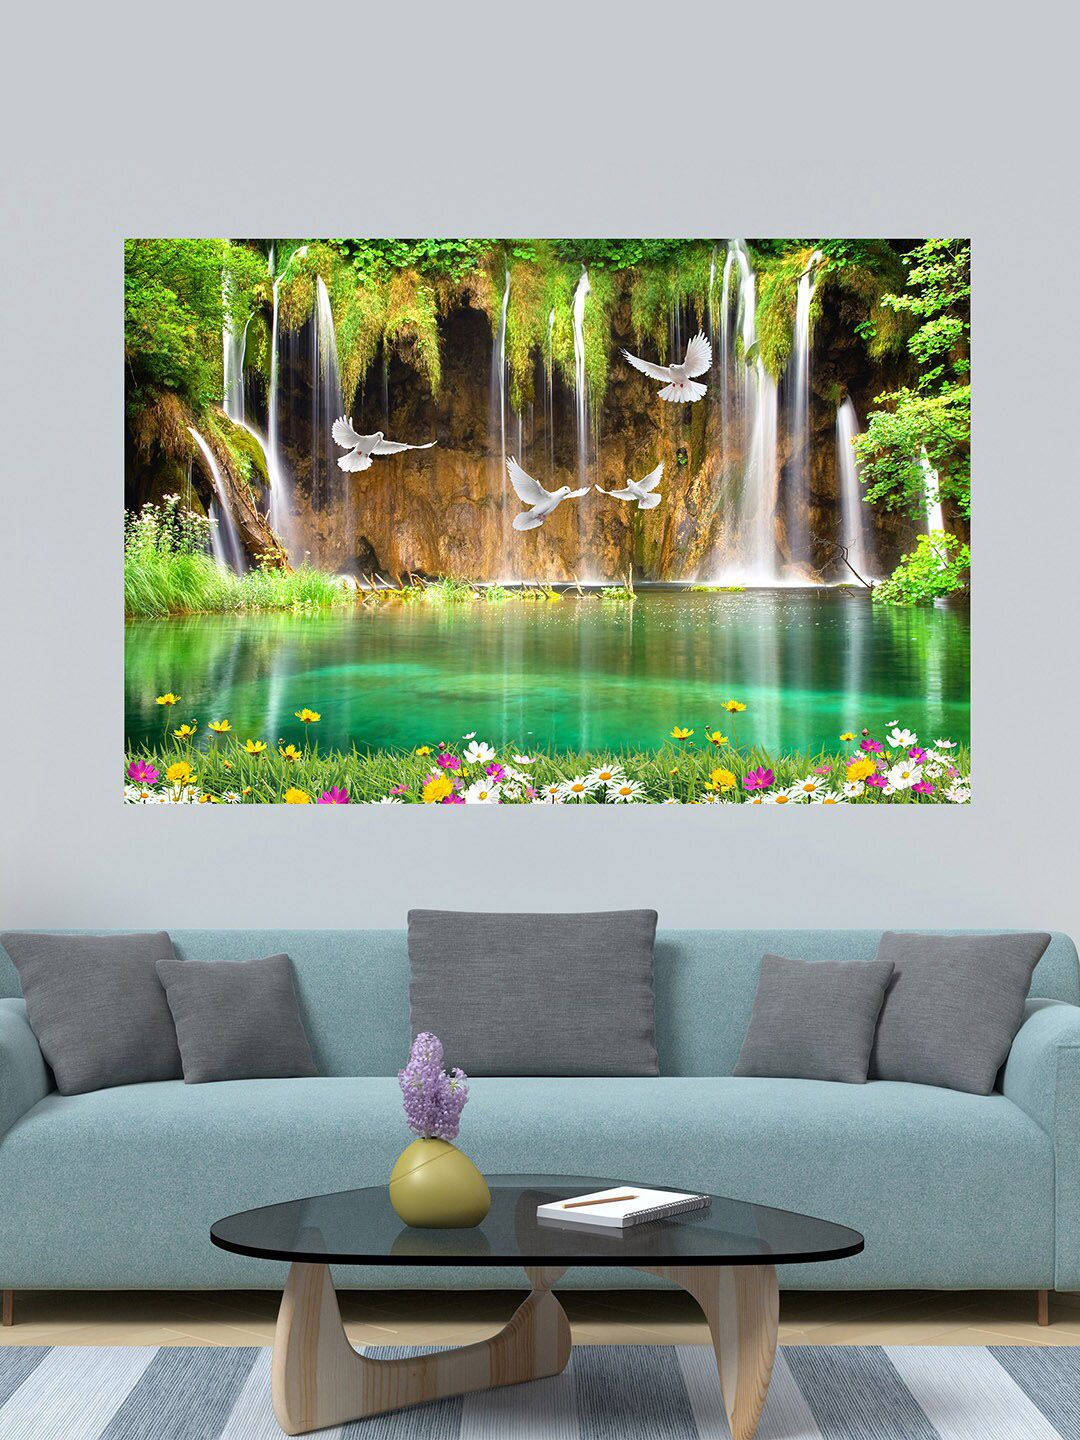 WENS Multicoloured Admiring Waterfall Printed Vinyl Wall Sticker Price in India